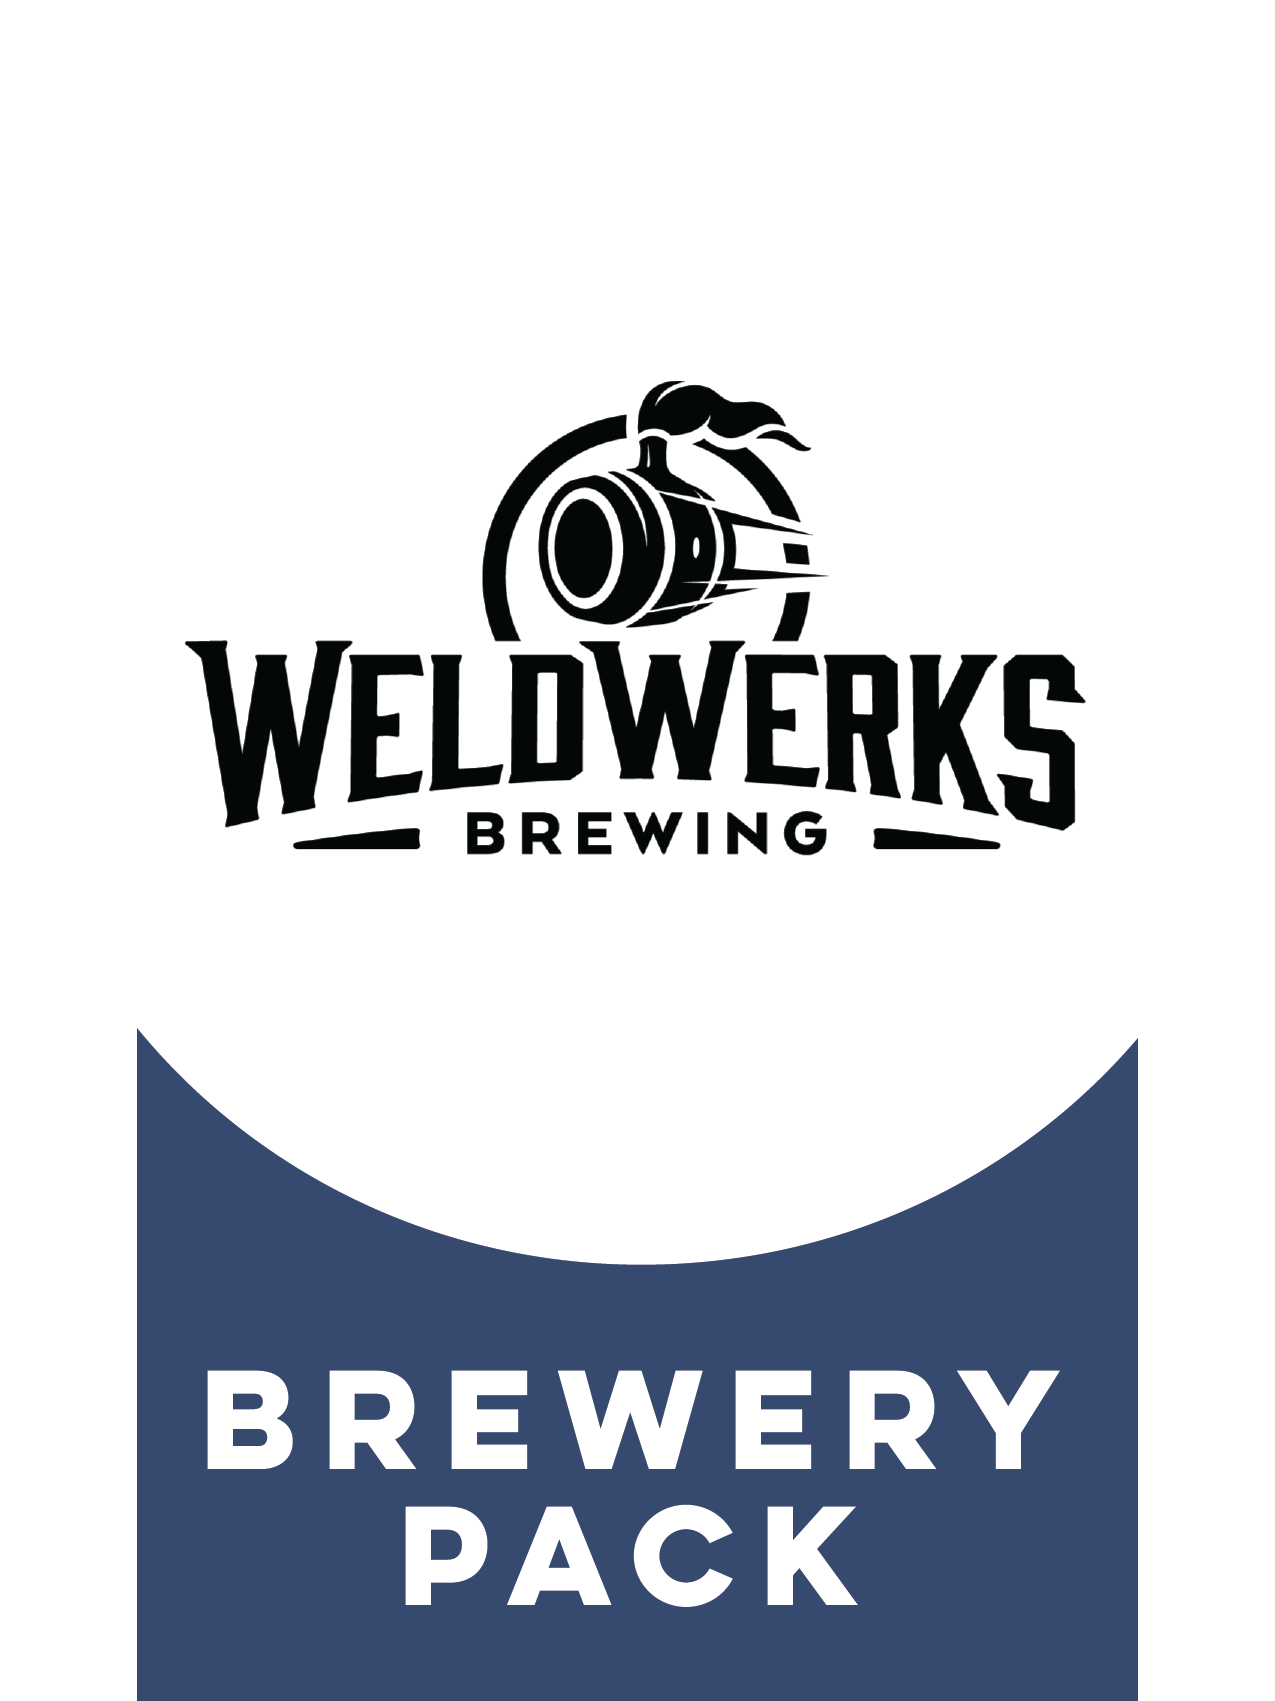 -WeldWerks- WeldWerks Brewery Pack-Packs & Cases- Only @ Beer Republic - The best online beer store for American & Canadian craft beer - Buy beer online from the USA and Canada - Bier online kopen - Amerikaans bier kopen - Craft beer store - Craft beer kopen - Amerikanisch bier kaufen - Bier online kaufen - Acheter biere online - IPA - Stout - Porter - New England IPA - Hazy IPA - Imperial Stout - Barrel Aged - Barrel Aged Imperial Stout - Brown - Dark beer - Blond - Blonde - Pilsner - Lager - Wheat - Weize